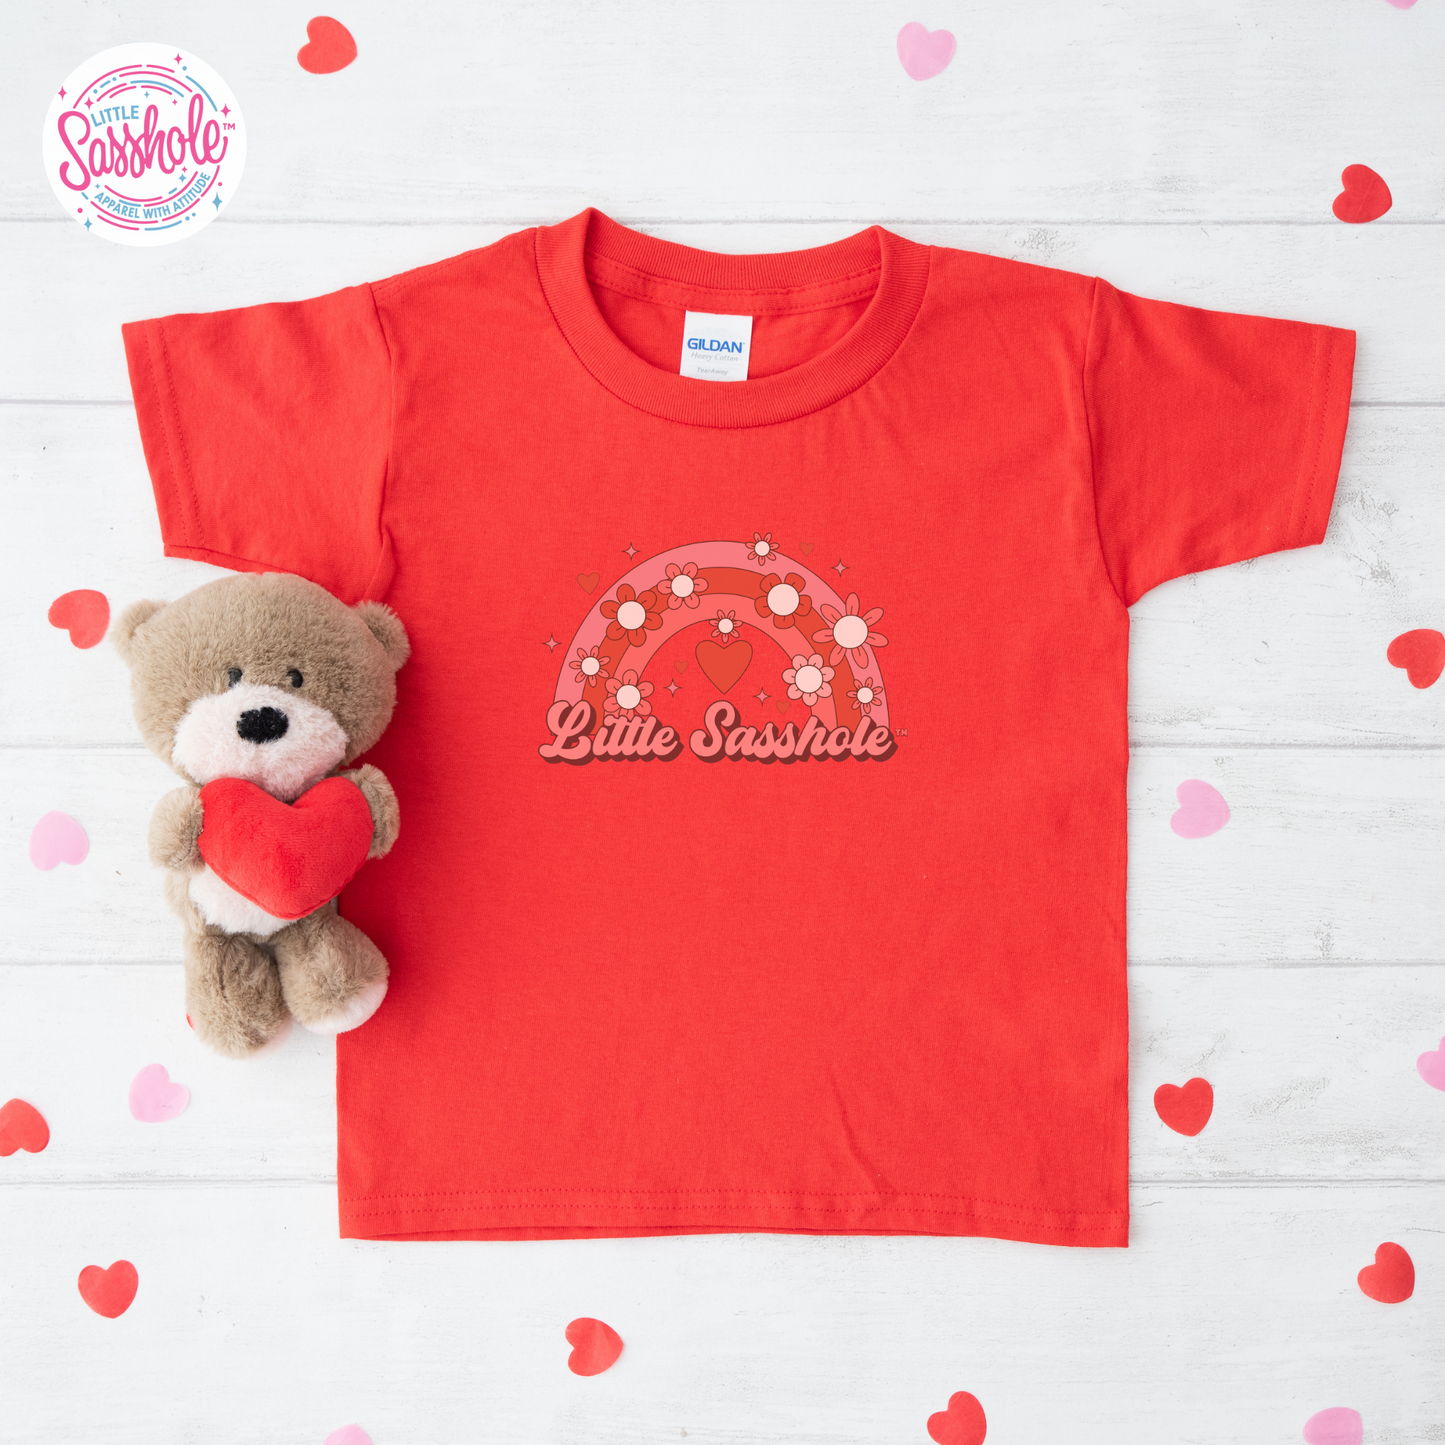 Valentine's wardrobe for toddlers, Valentine's fashion for little ones, Valentine's Day toddler style, Valentine's cuteness for toddlers, Valentine vibes toddler tee, Valentine toddler shirt, Valentine princess tee, Valentine joy for toddlers, Toddler girl's love-themed clothing, Toddler fashion for the love season, Toddler fashion for love season, Toddler cupid t-shirt, Toddler cupid in action tee, Toddler cupid fashion, T-shirts, Sweetheart toddler girl style, Sweetheart toddler girl apparel,